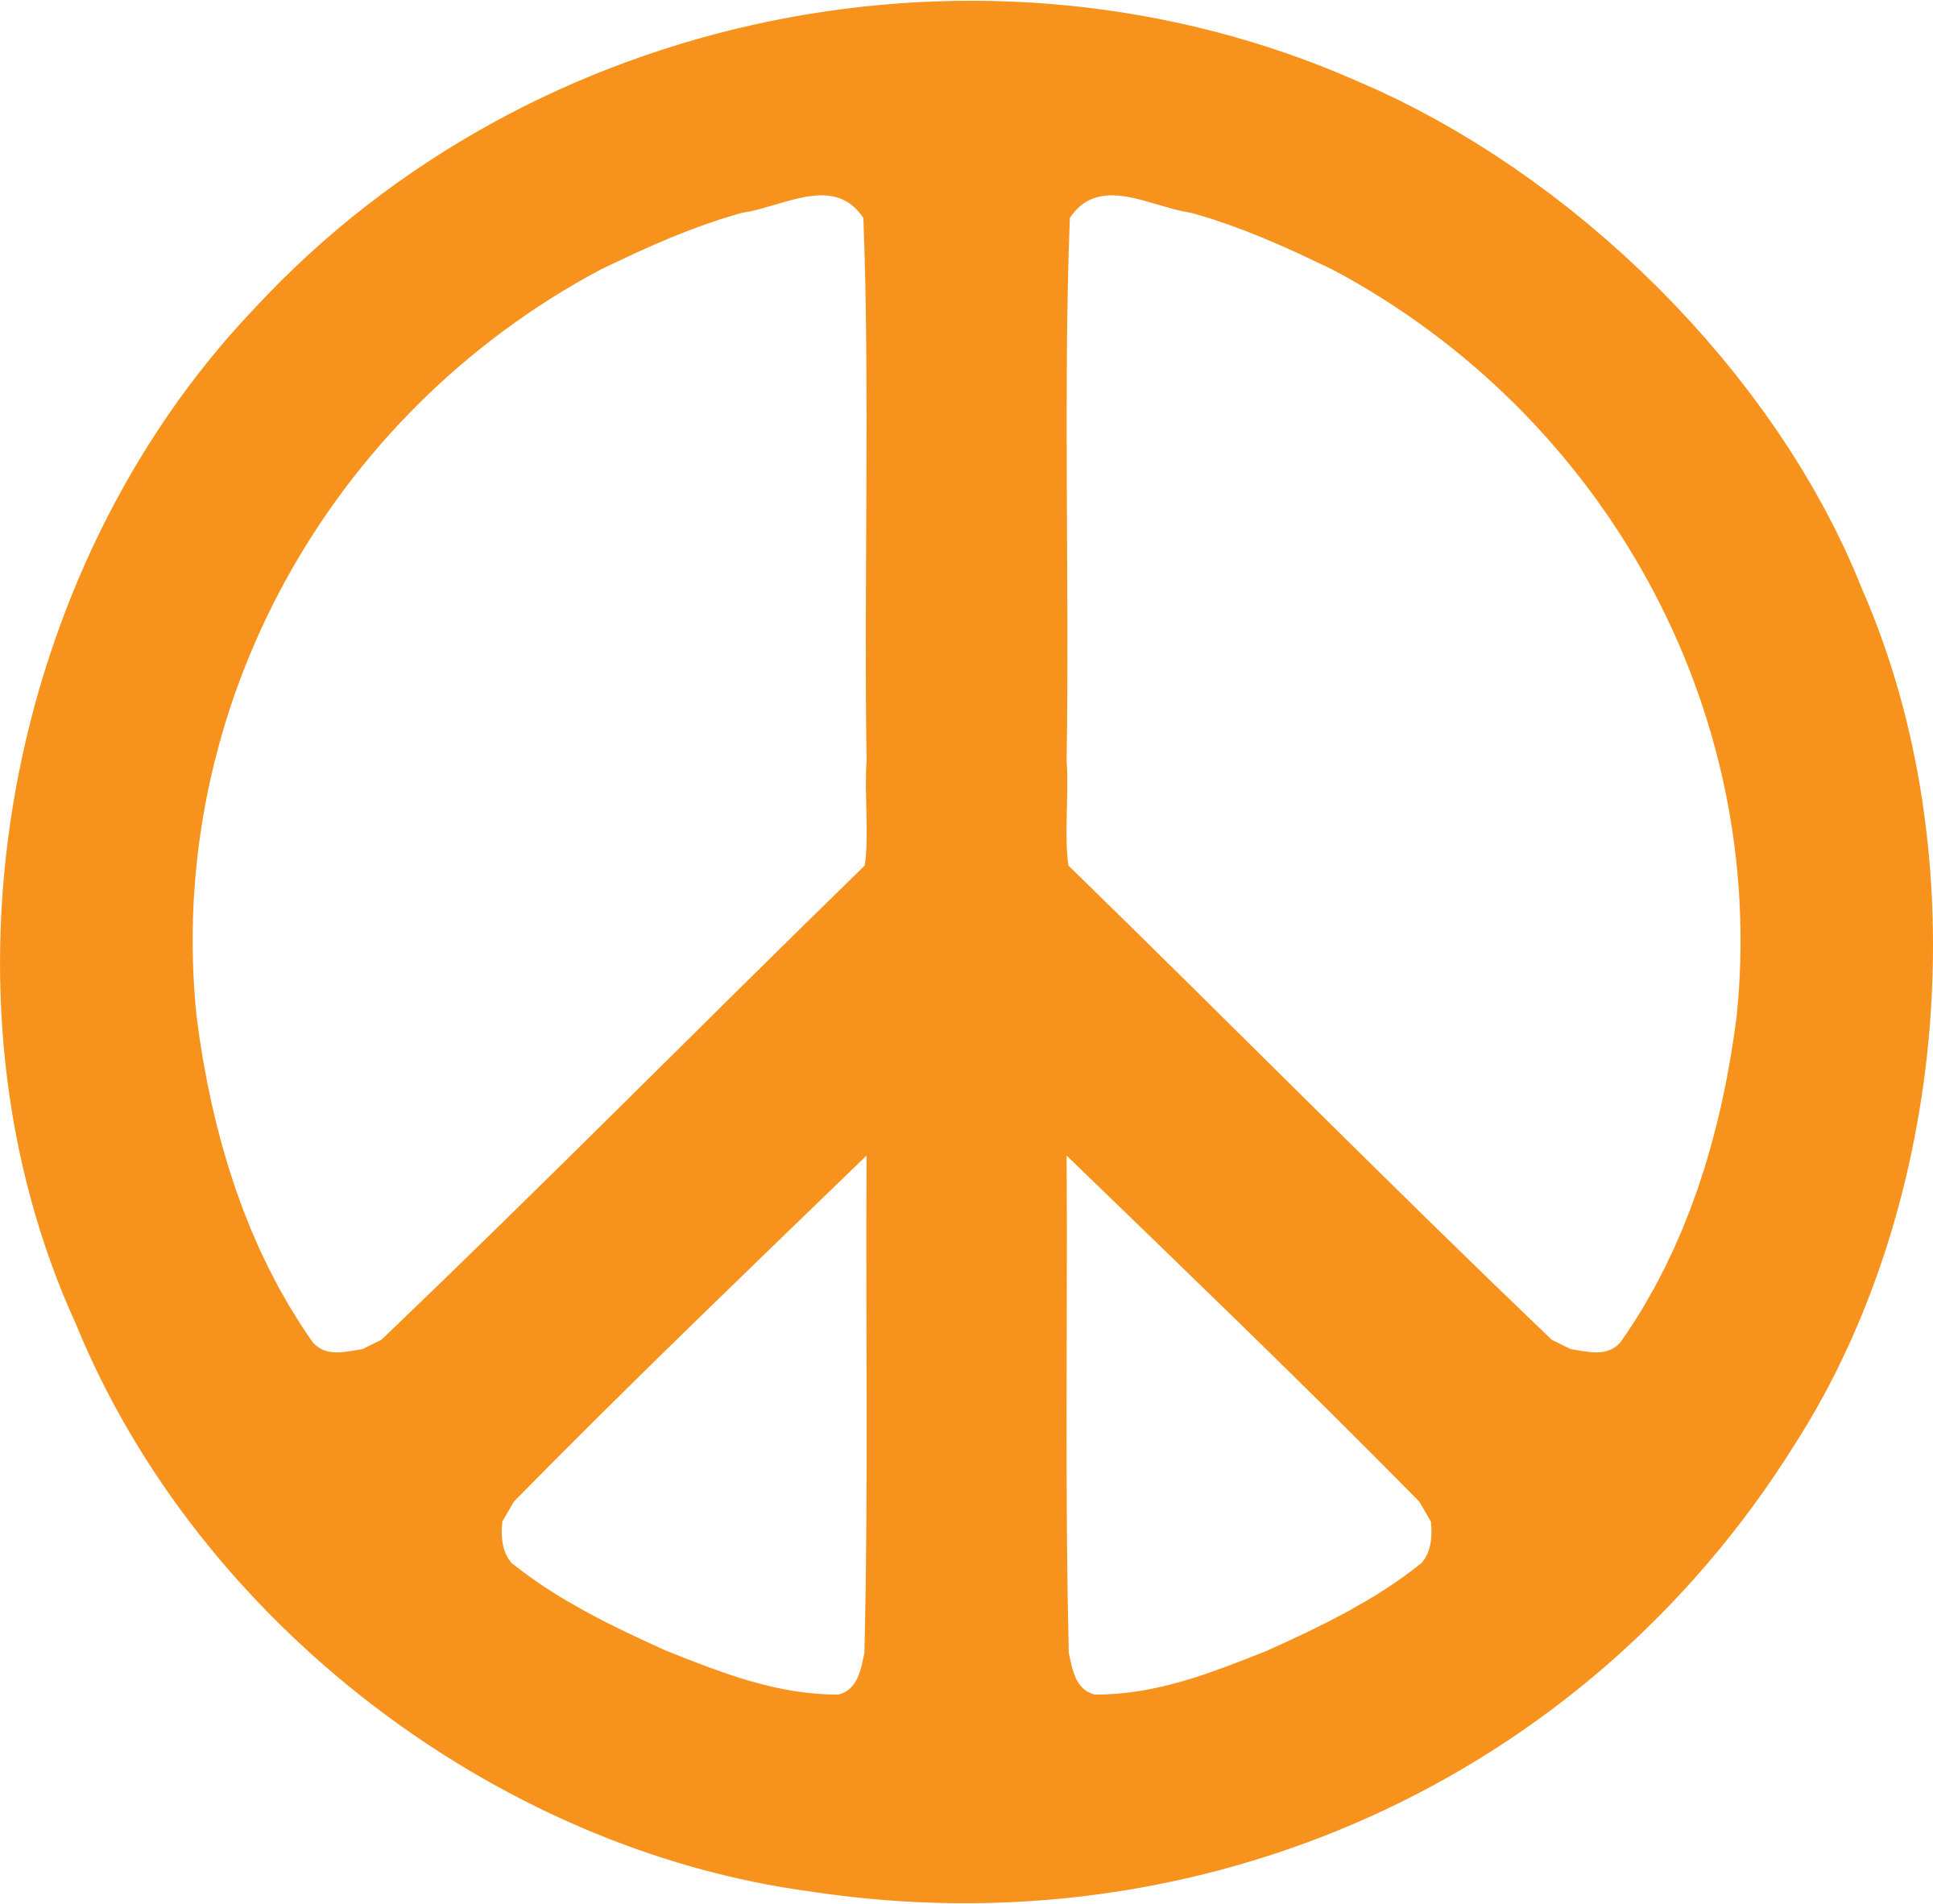 Free Peace Sign Transparent, Download Free Peace Sign Transparent png ...